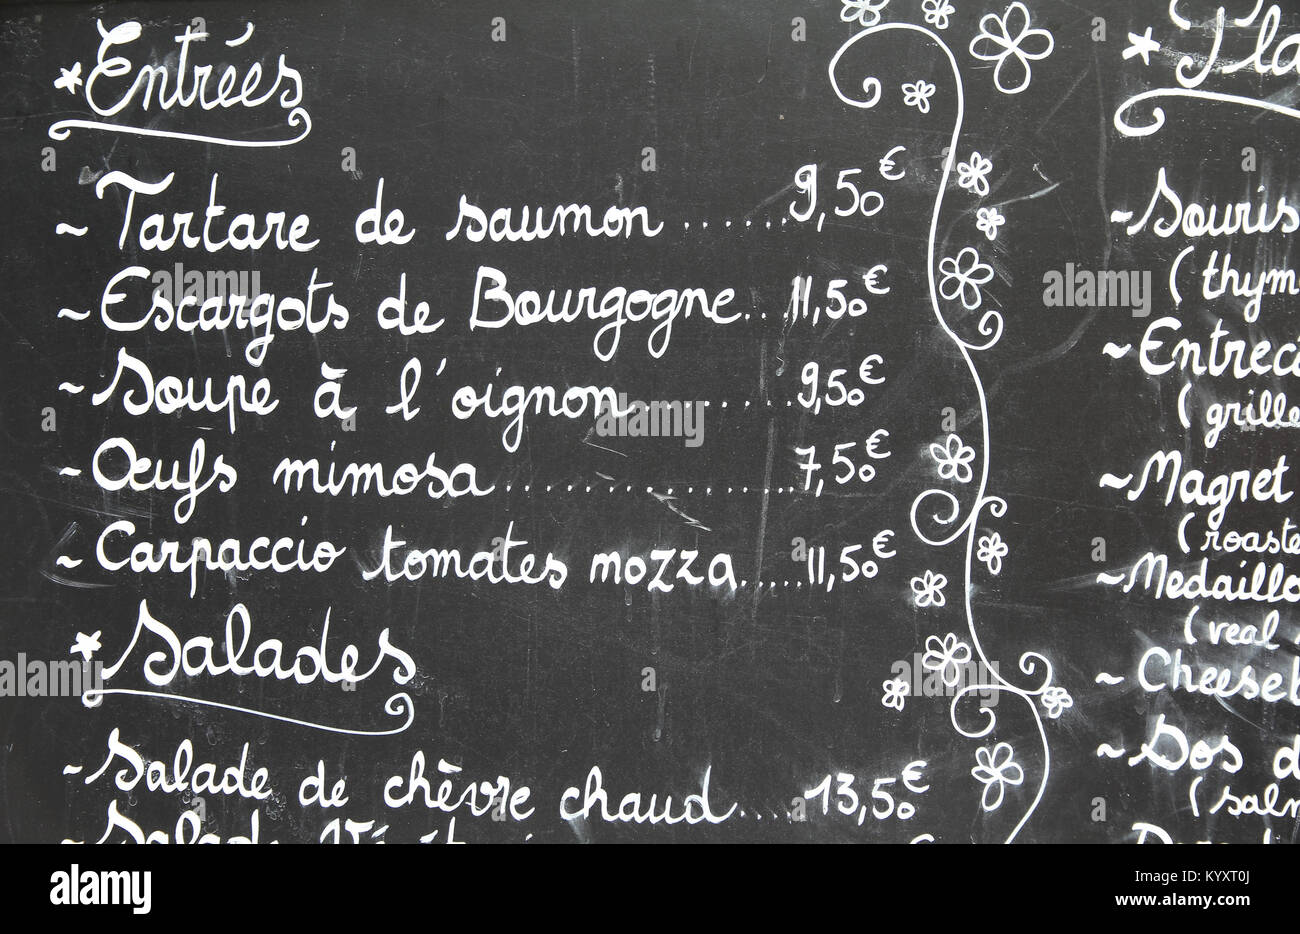 restaurant menu in french outdoor bar in paris france KYXT0J